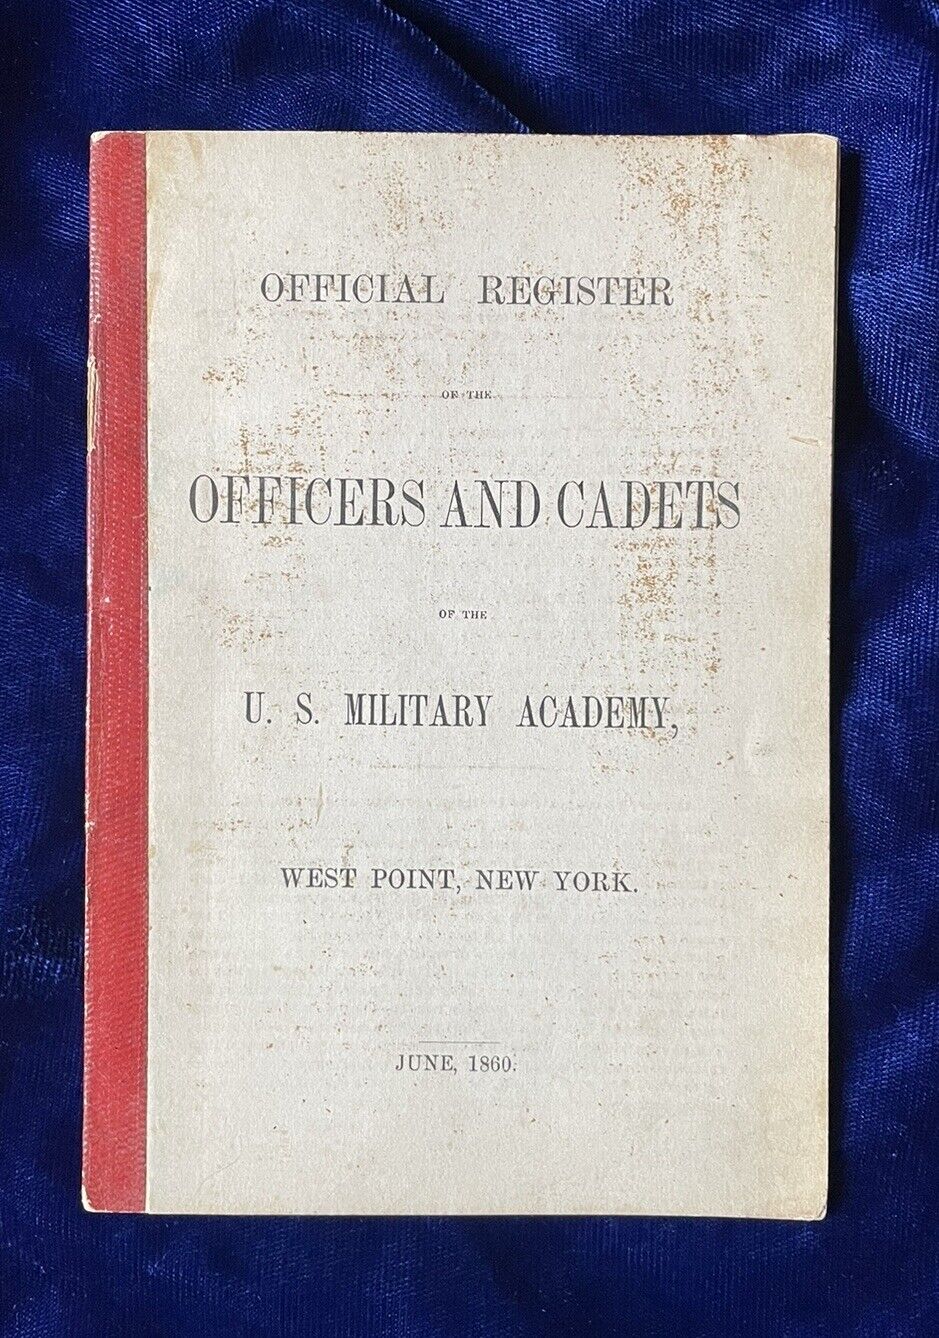 Original Register Cadets US Military Academy West Point 1860 USMA Custer Cushing